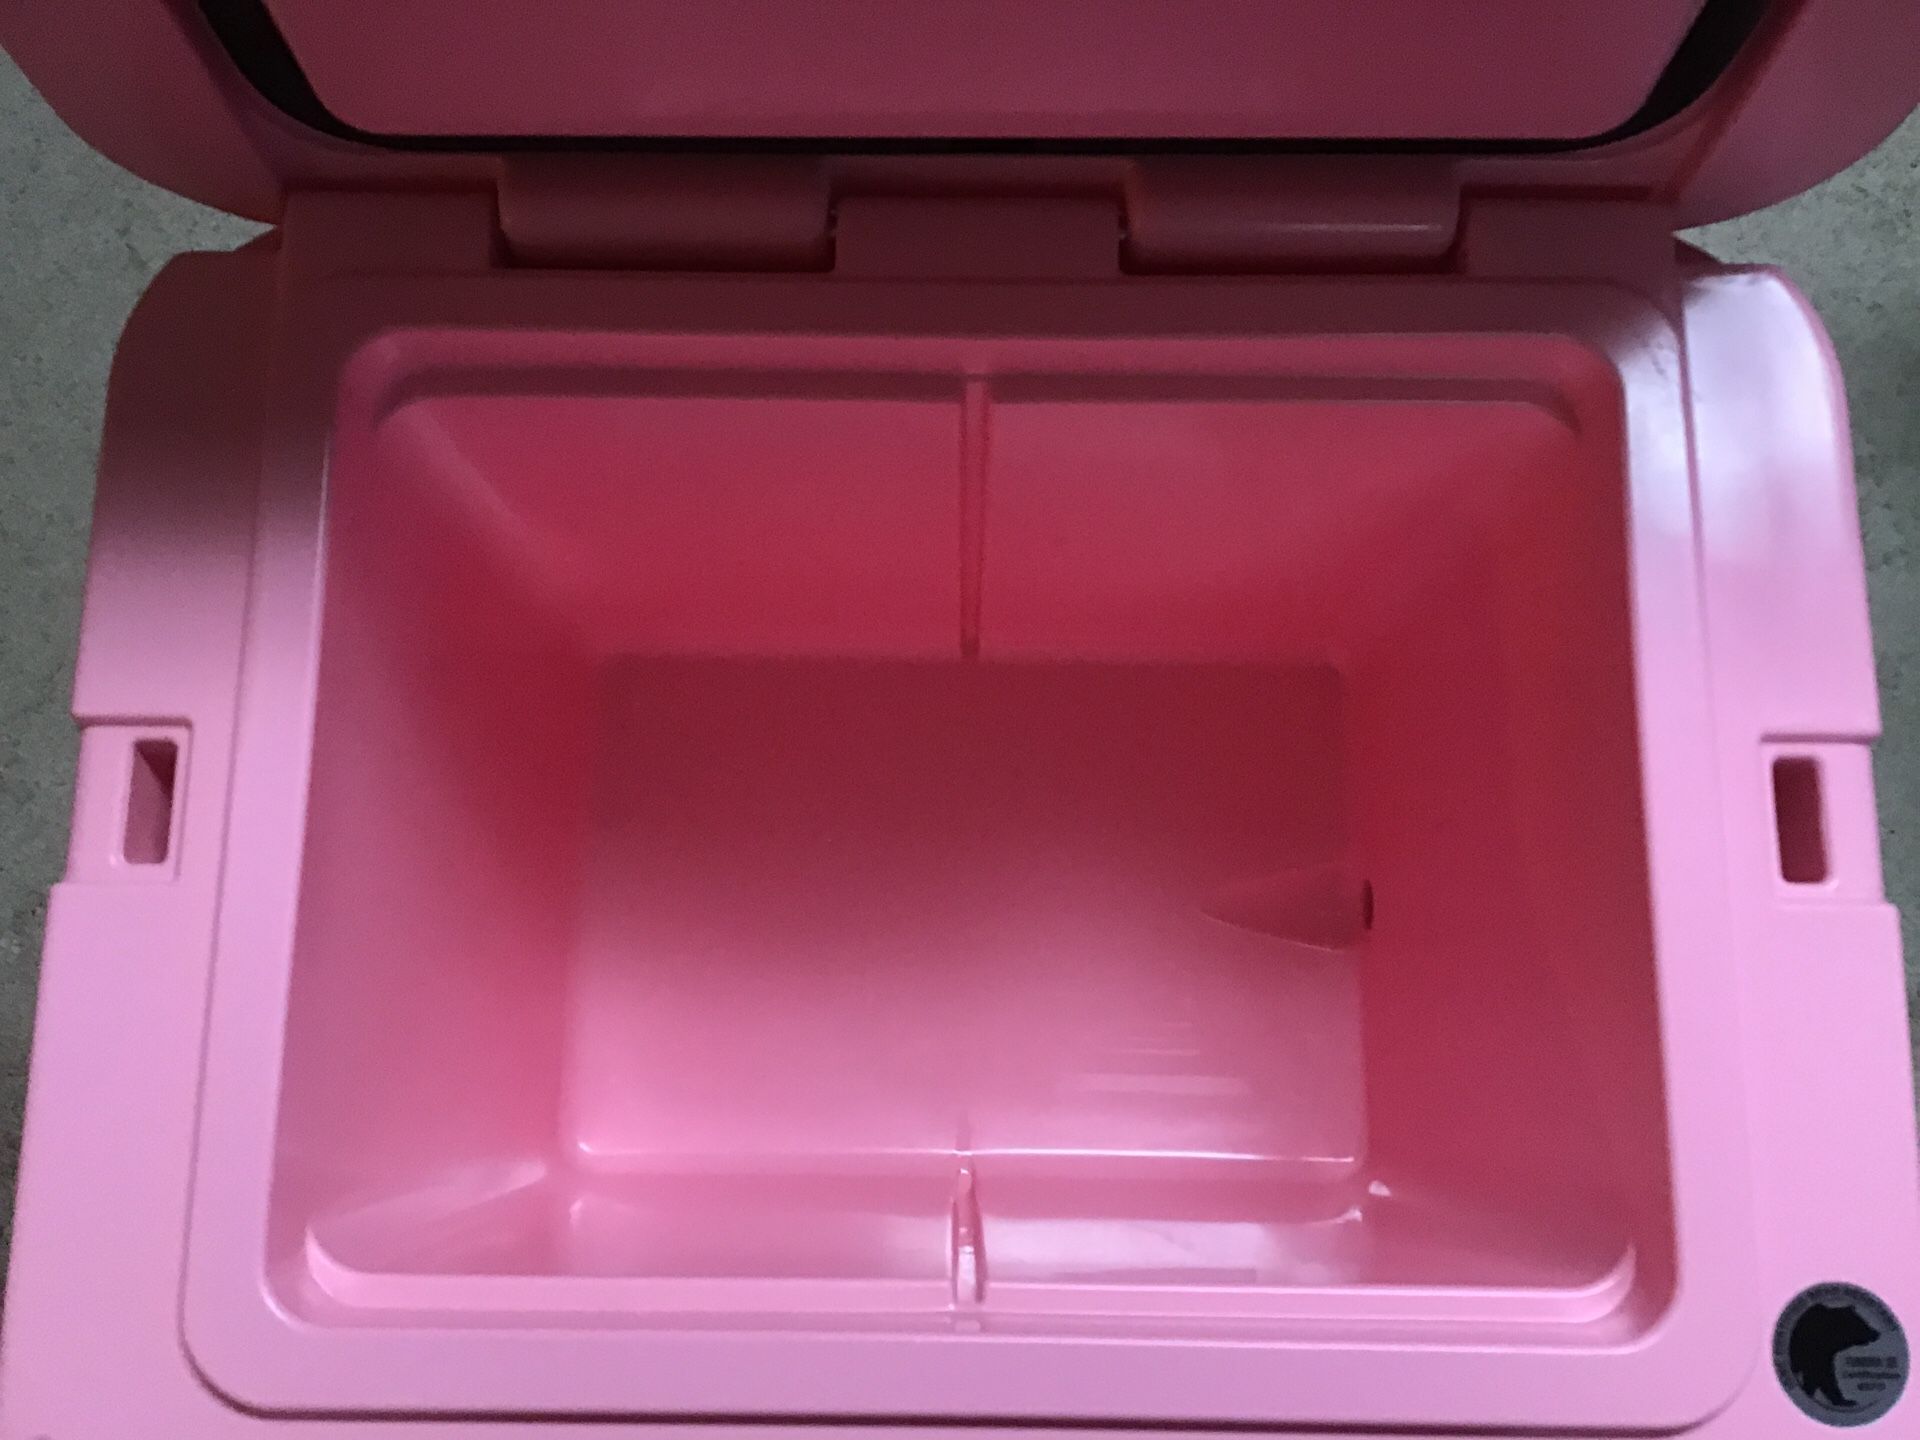 PINK YETI TUNDRA 35 for Sale in Houston, TX - OfferUp